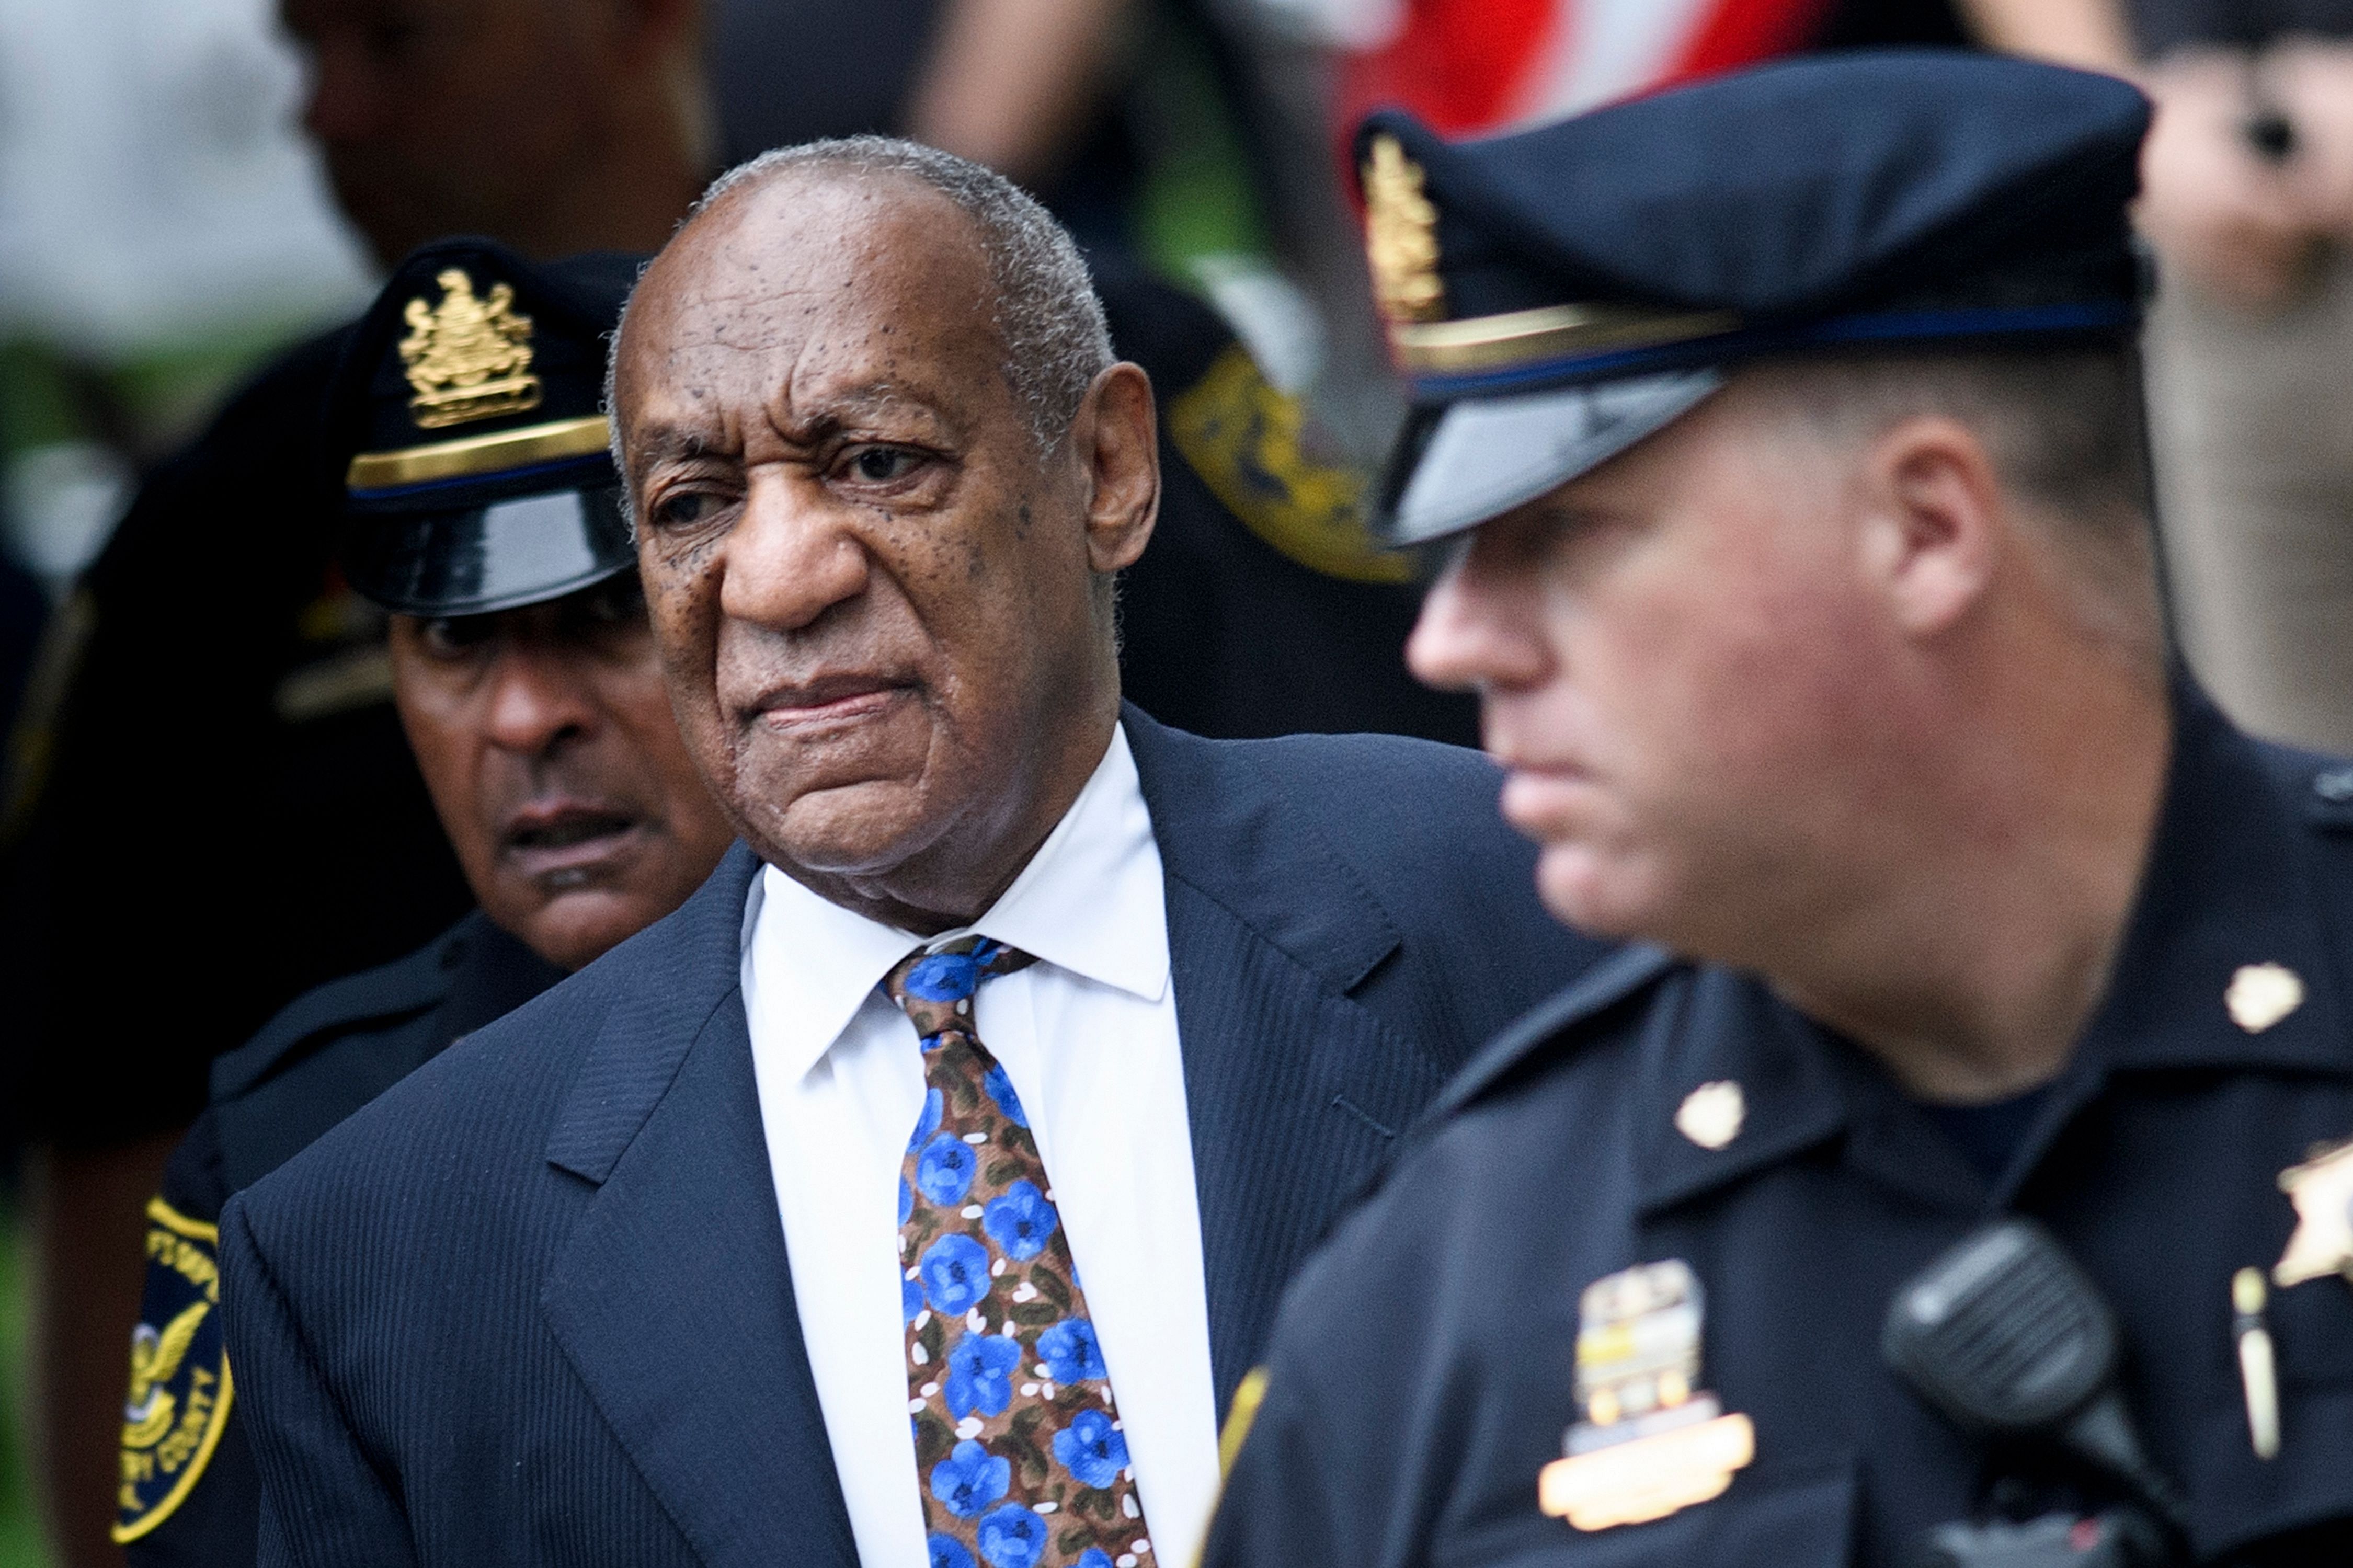 US actor Bill Cosby arrives at court in Norristown, Pennsylvania to face sentencing for sexual assault.. (AFP Photo)